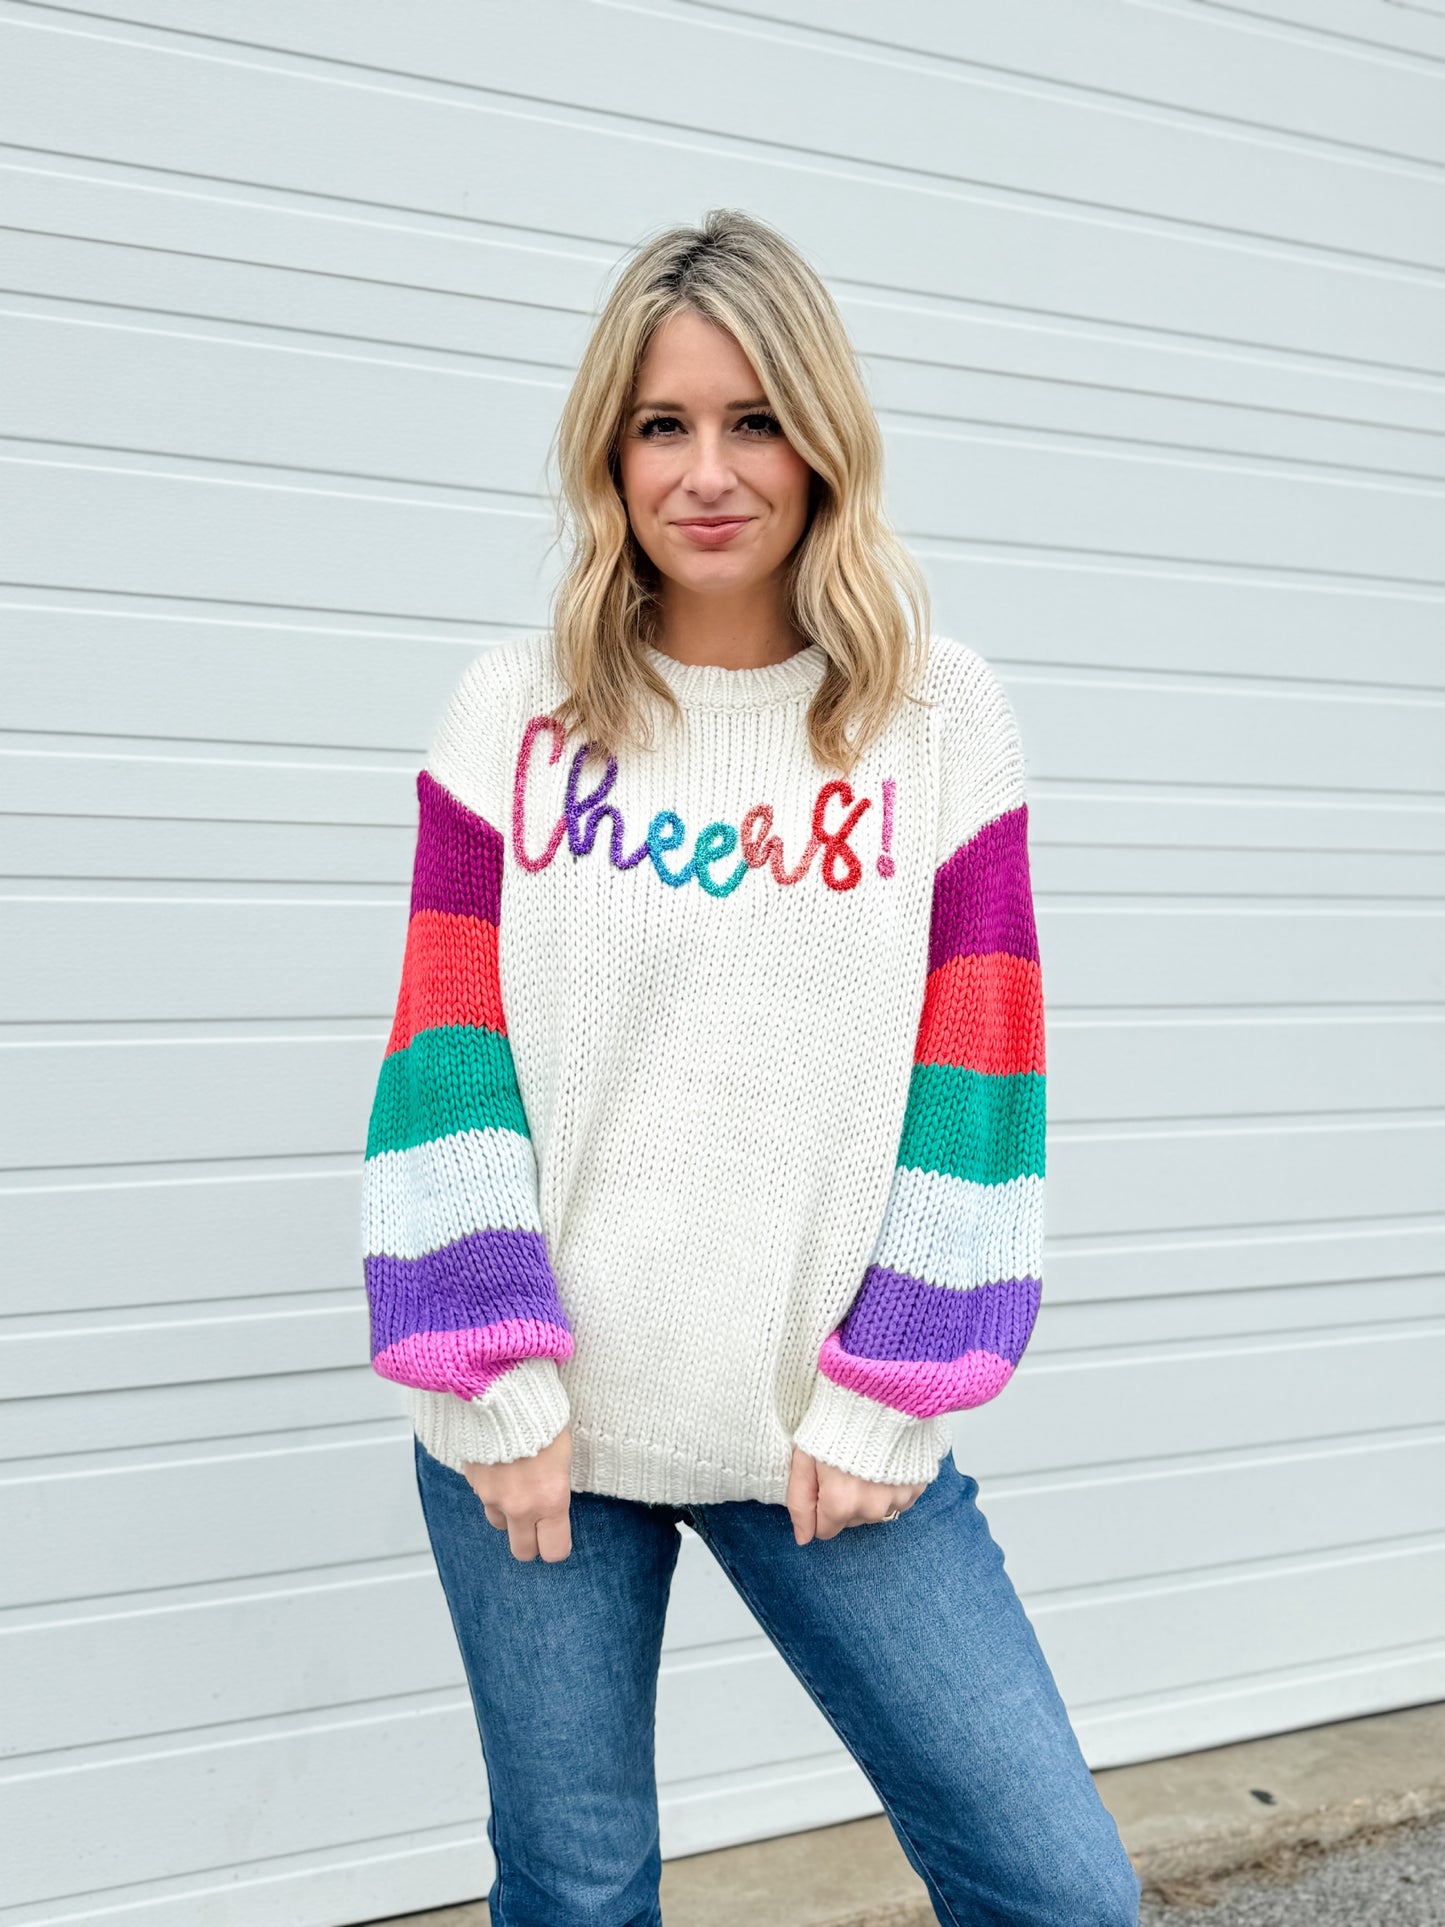 Cheers! Tinsel Colorful Sweater